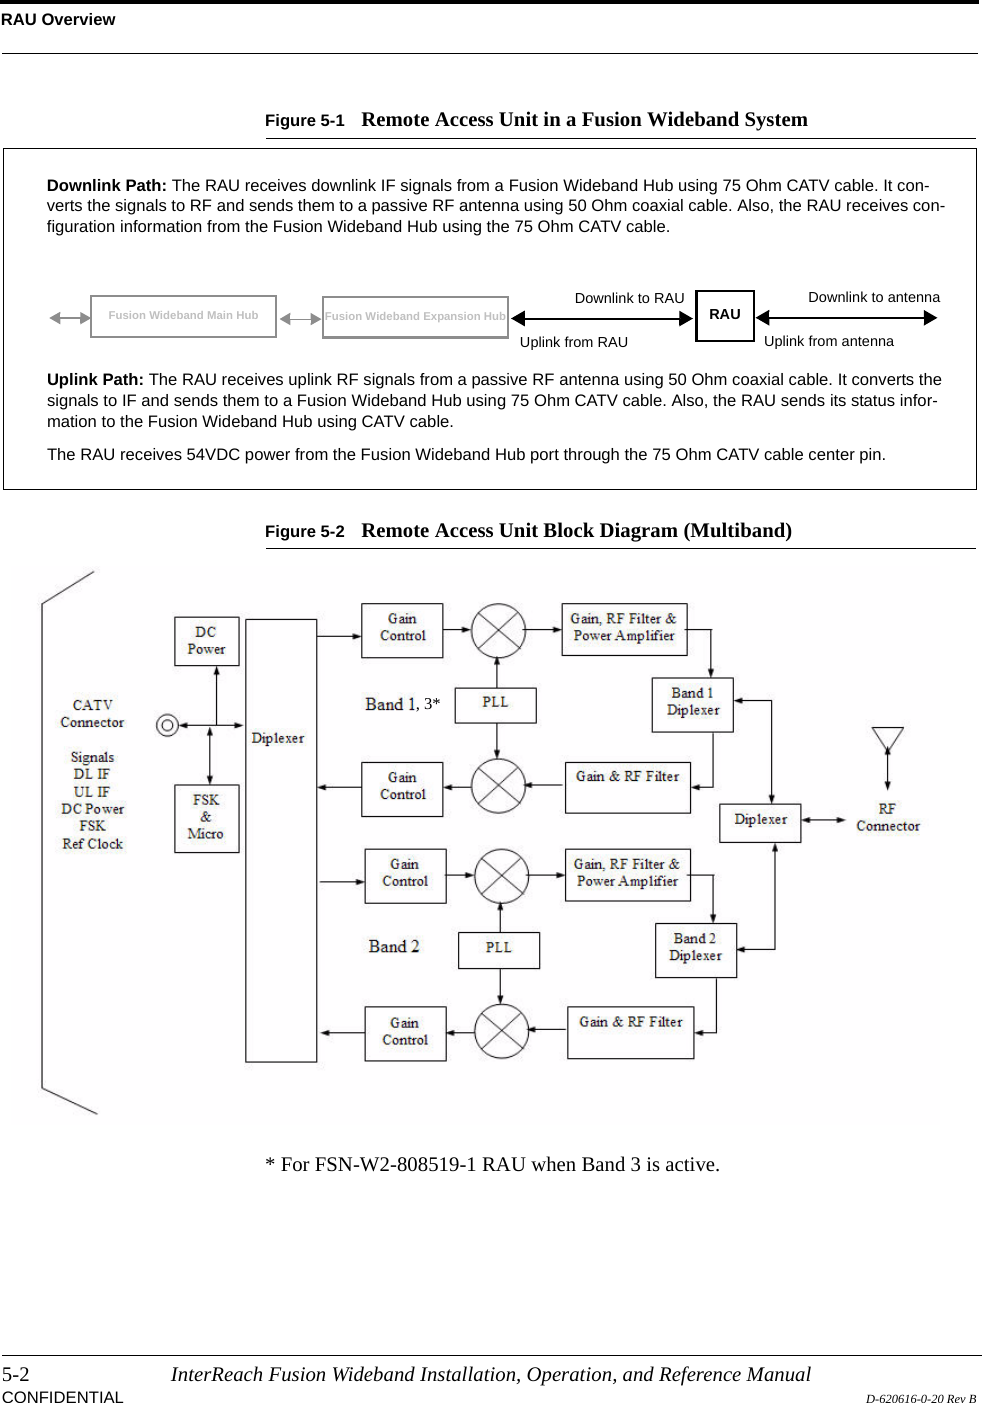 RAU Overview5-2 InterReach Fusion Wideband Installation, Operation, and Reference ManualCONFIDENTIAL D-620616-0-20 Rev BFigure 5-1 Remote Access Unit in a Fusion Wideband SystemFigure 5-2 Remote Access Unit Block Diagram (Multiband)* For FSN-W2-808519-1 RAU when Band 3 is active.Fusion Wideband Expansion Hub RAUDownlink Path: The RAU receives downlink IF signals from a Fusion Wideband Hub using 75 Ohm CATV cable. It con-verts the signals to RF and sends them to a passive RF antenna using 50 Ohm coaxial cable. Also, the RAU receives con-figuration information from the Fusion Wideband Hub using the 75 Ohm CATV cable.Uplink Path: The RAU receives uplink RF signals from a passive RF antenna using 50 Ohm coaxial cable. It converts the signals to IF and sends them to a Fusion Wideband Hub using 75 Ohm CATV cable. Also, the RAU sends its status infor-mation to the Fusion Wideband Hub using CATV cable.The RAU receives 54VDC power from the Fusion Wideband Hub port through the 75 Ohm CATV cable center pin.Downlink to RAUUplink from RAUFusion Wideband Main HubDownlink to antennaUplink from antenna, 3*